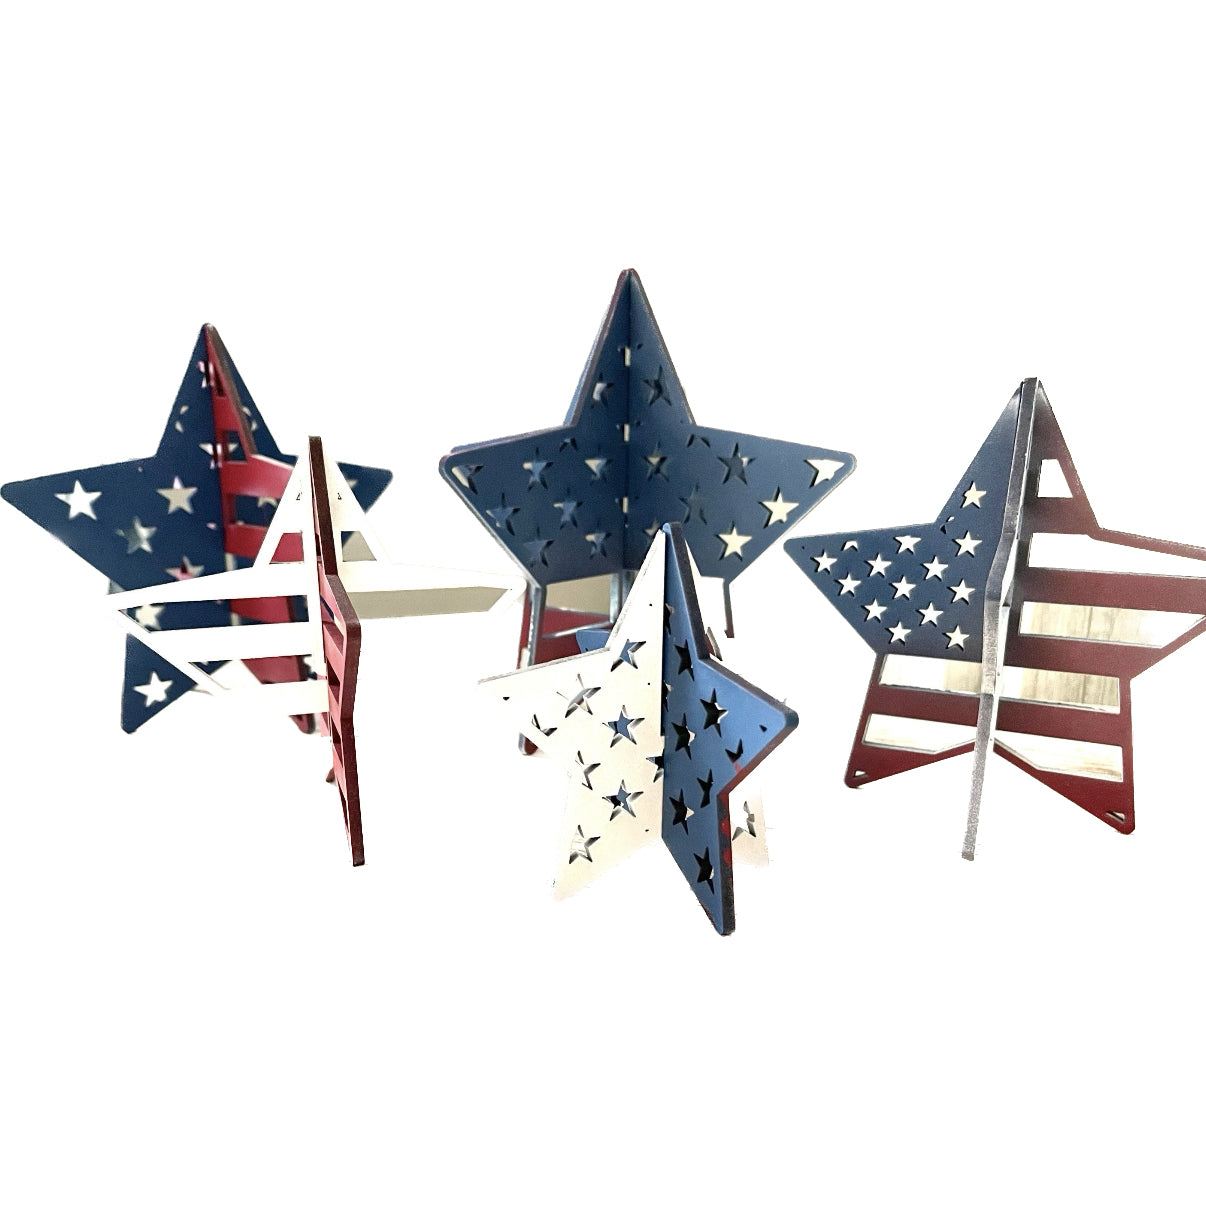 3D Patriotic Stars Shelf Sitters (Set of 5) For Thick Proofgrade